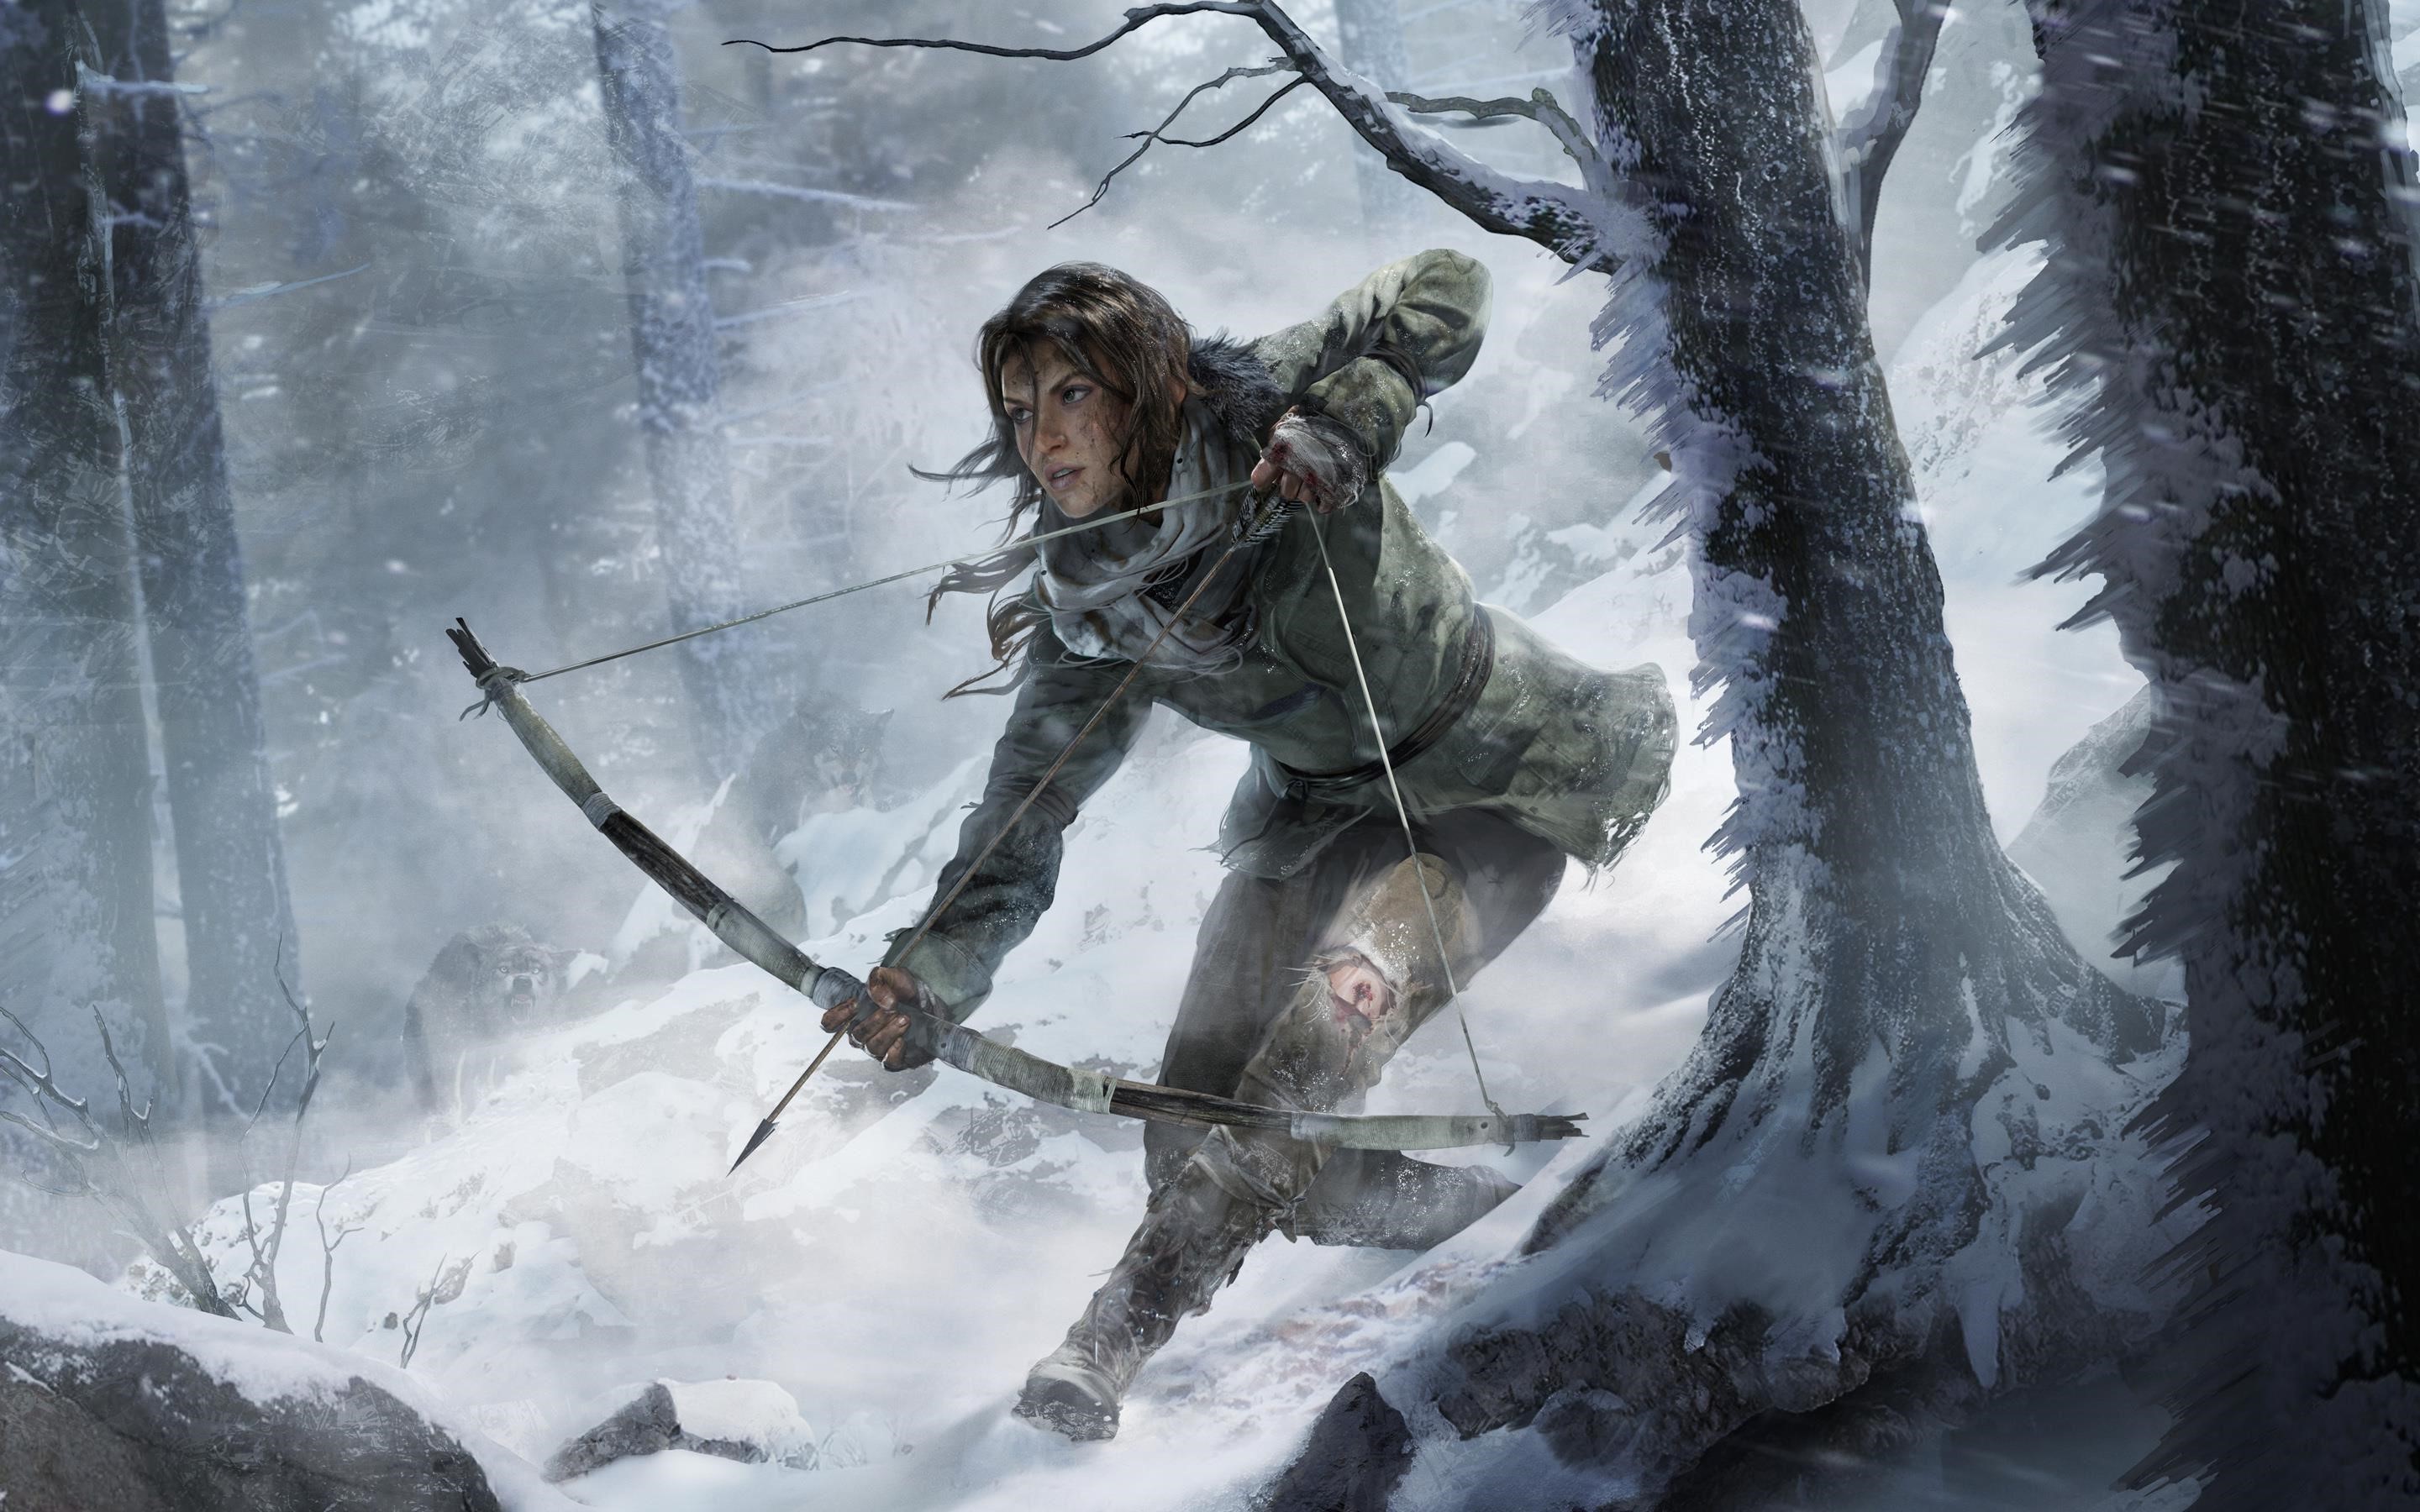 Tomb Raider 2015 Android Wallpaper on